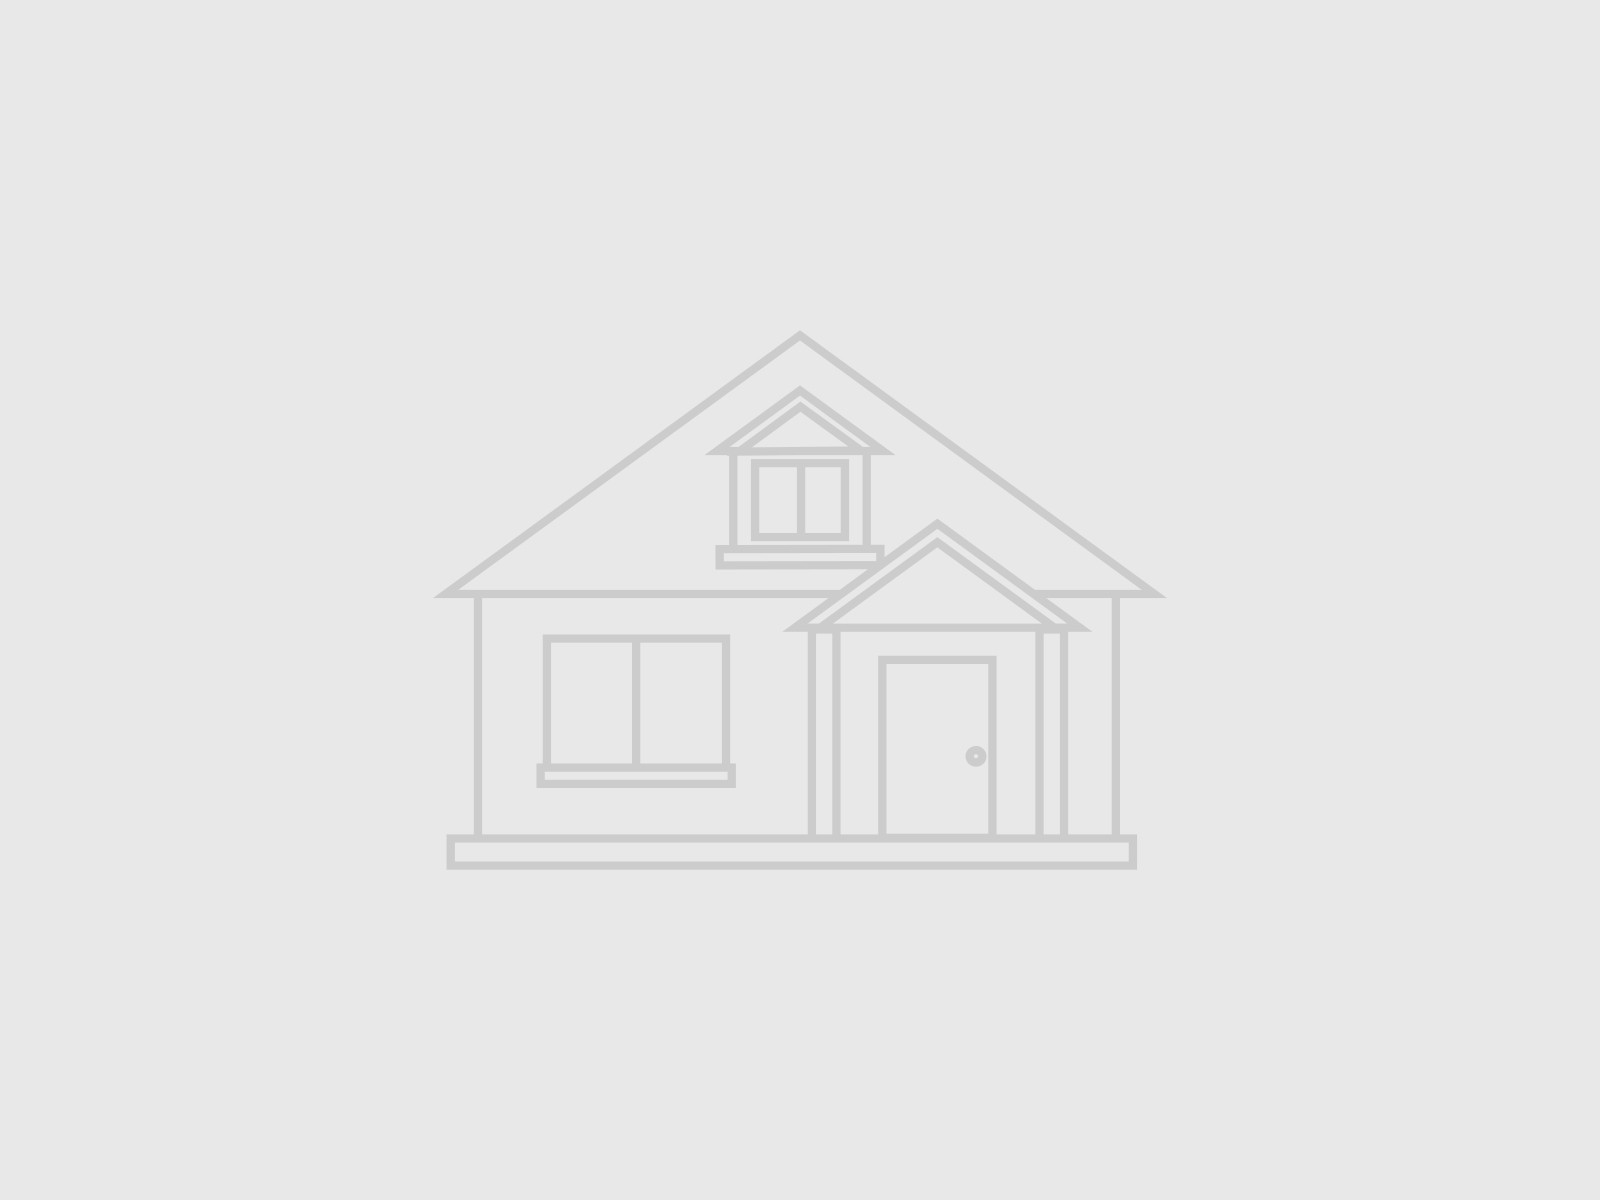 14. Valuebuild Homes - Greenville Sc - Build On Your L